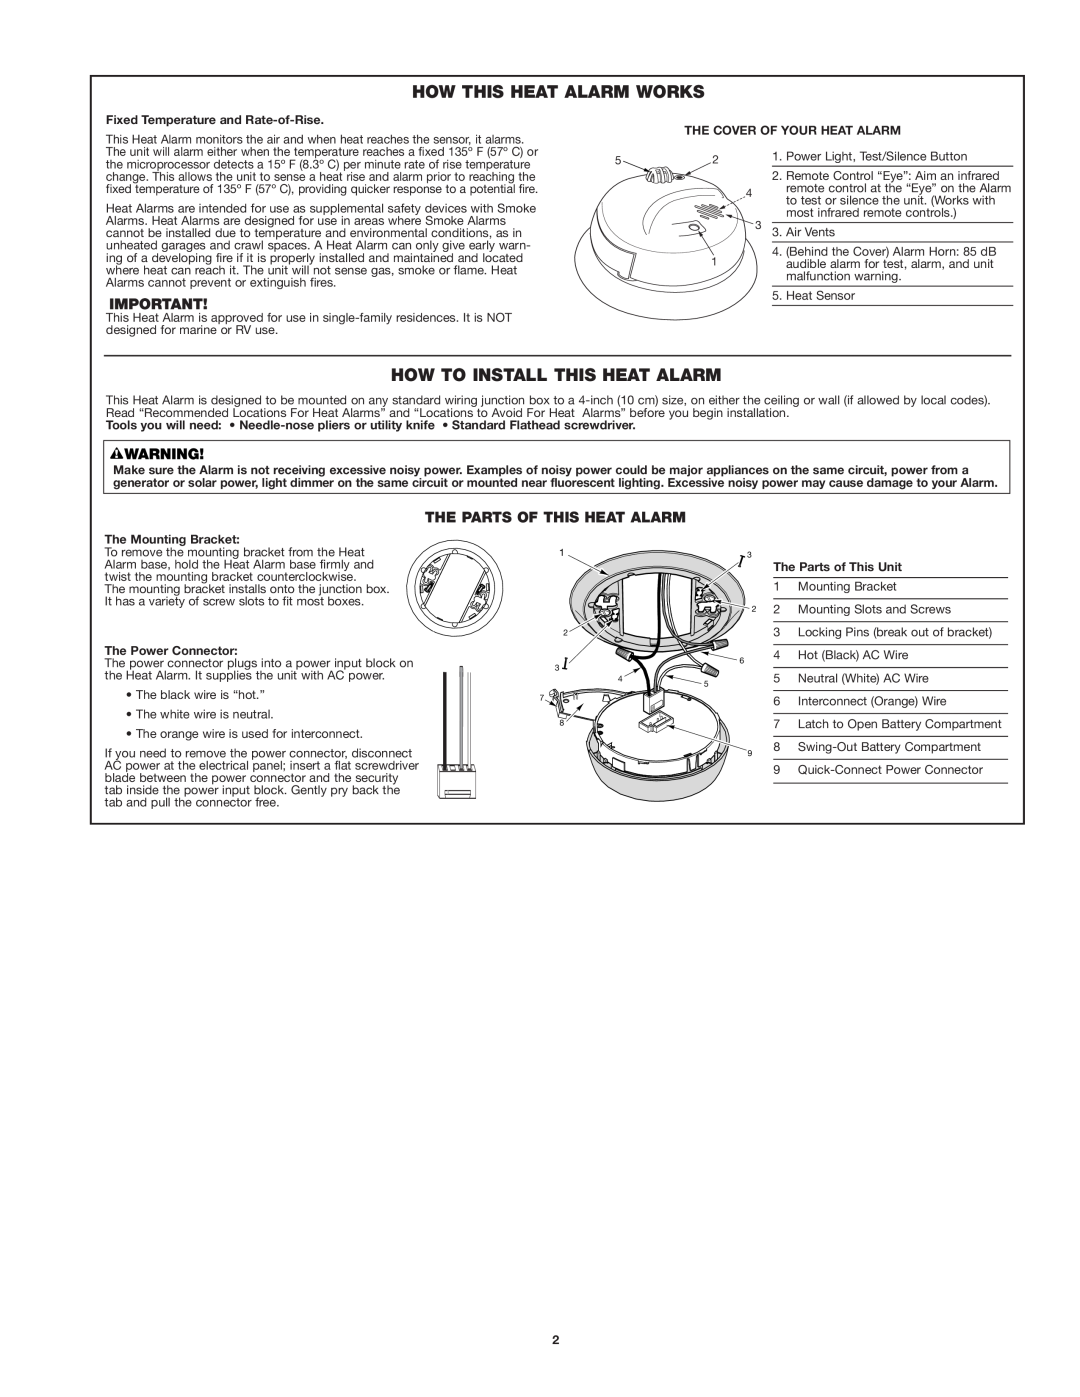 First Alert HD6135FB user manual How This Heat Alarm Works, How To Install This Heat Alarm, The Parts Of This Heat Alarm 